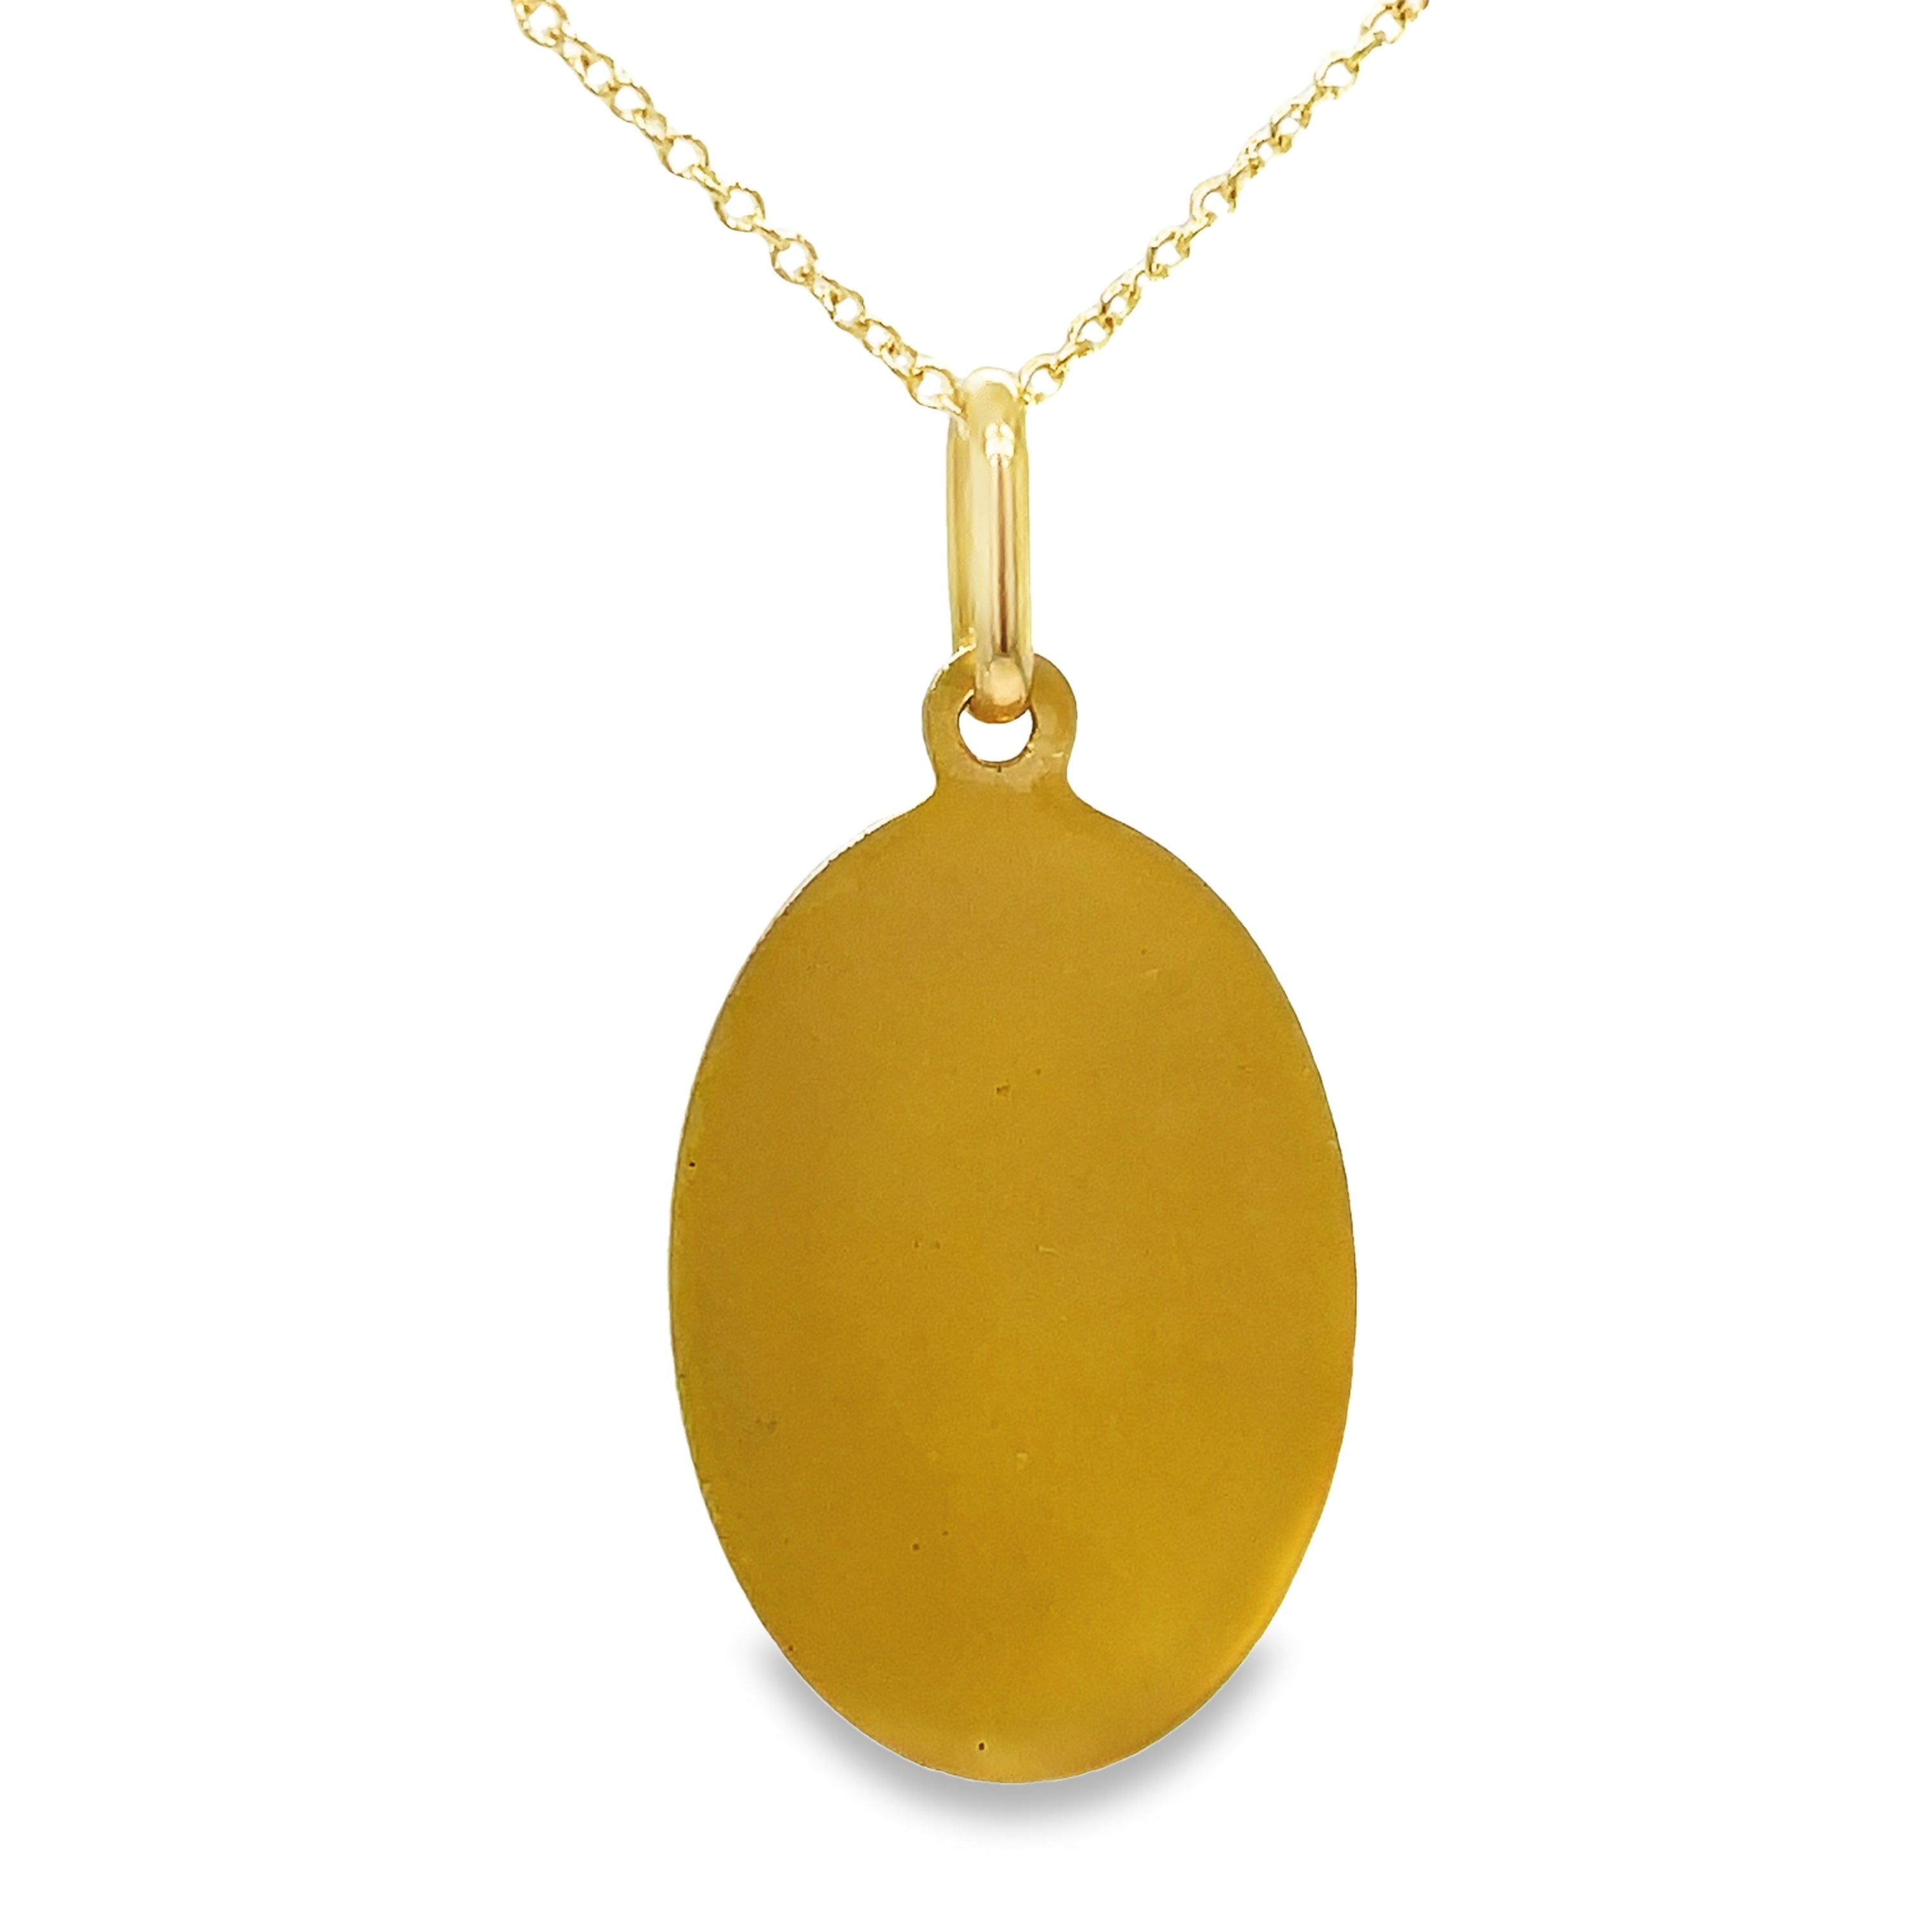 Crafted with 18k Italian yellow gold, this pendant necklace features a stunning Madonna Virgin medal with a matte finish. Measuring 27.00 x 15.00 mm, this elegant piece is a beautiful addition to any jewelry collection. Chain sold separately for $350.00 (18K). Enhance your style with this exquisite necklace.